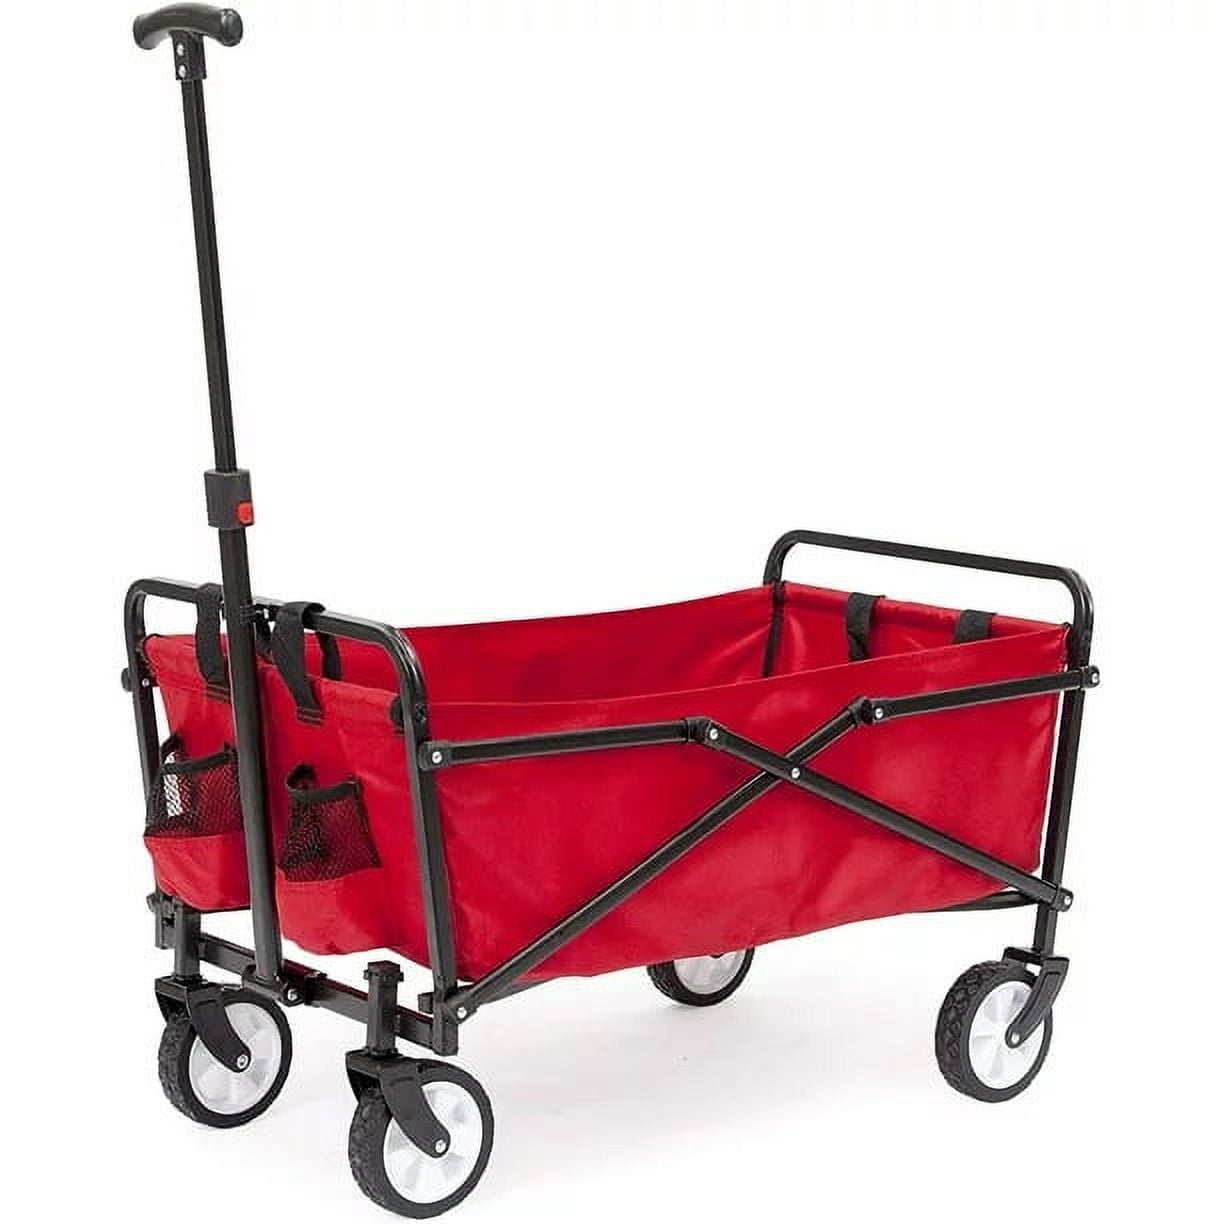 Seina Compact Outdoor Folding Utility Wagon, RED